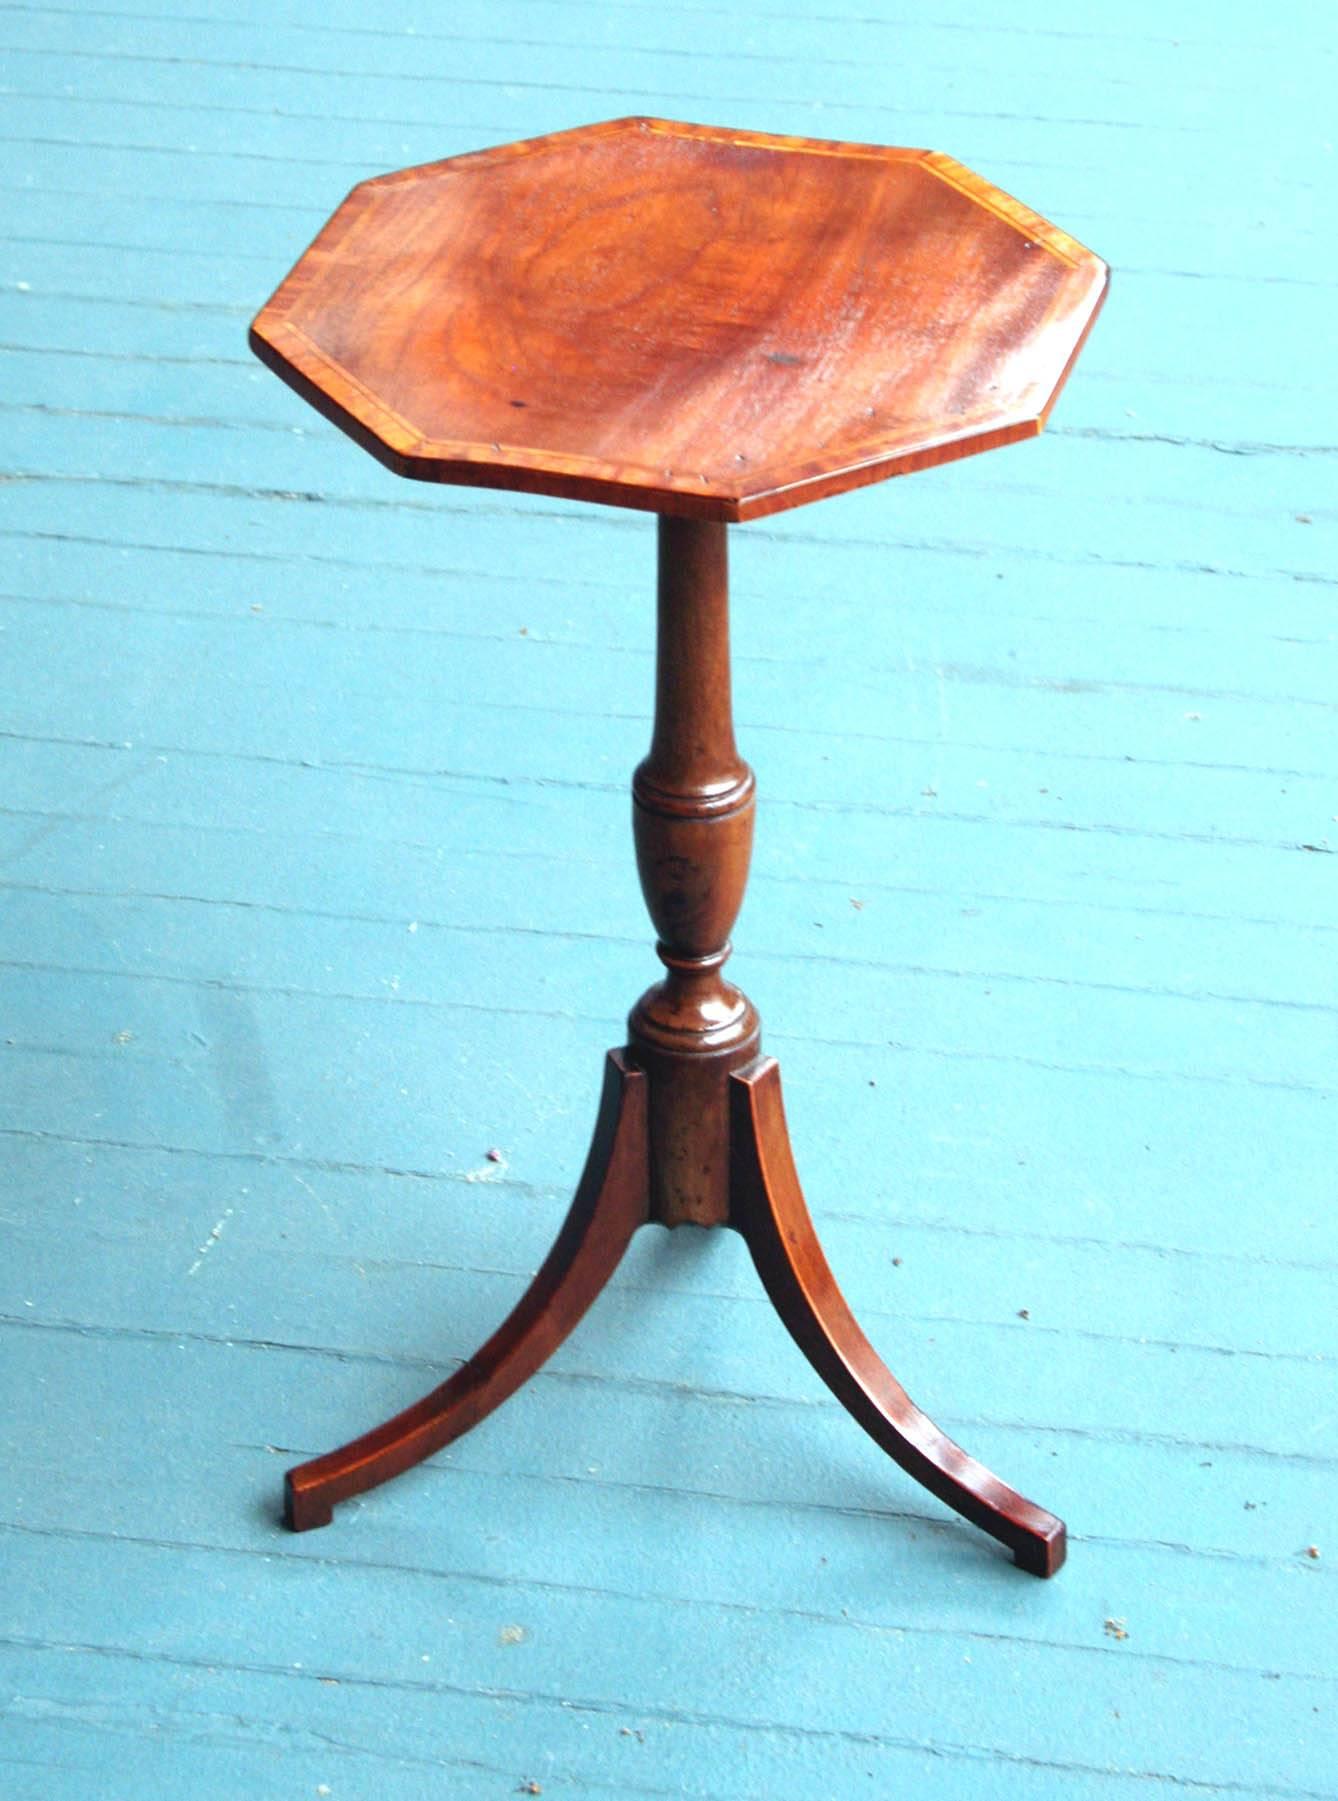 Extremely rare small Sheraton wine table having an octagonal mahogany top banded in satinwood above a vasiform turned pedestal and supported by three downswept legs with satinwood stringing. Most tables of this form described as 